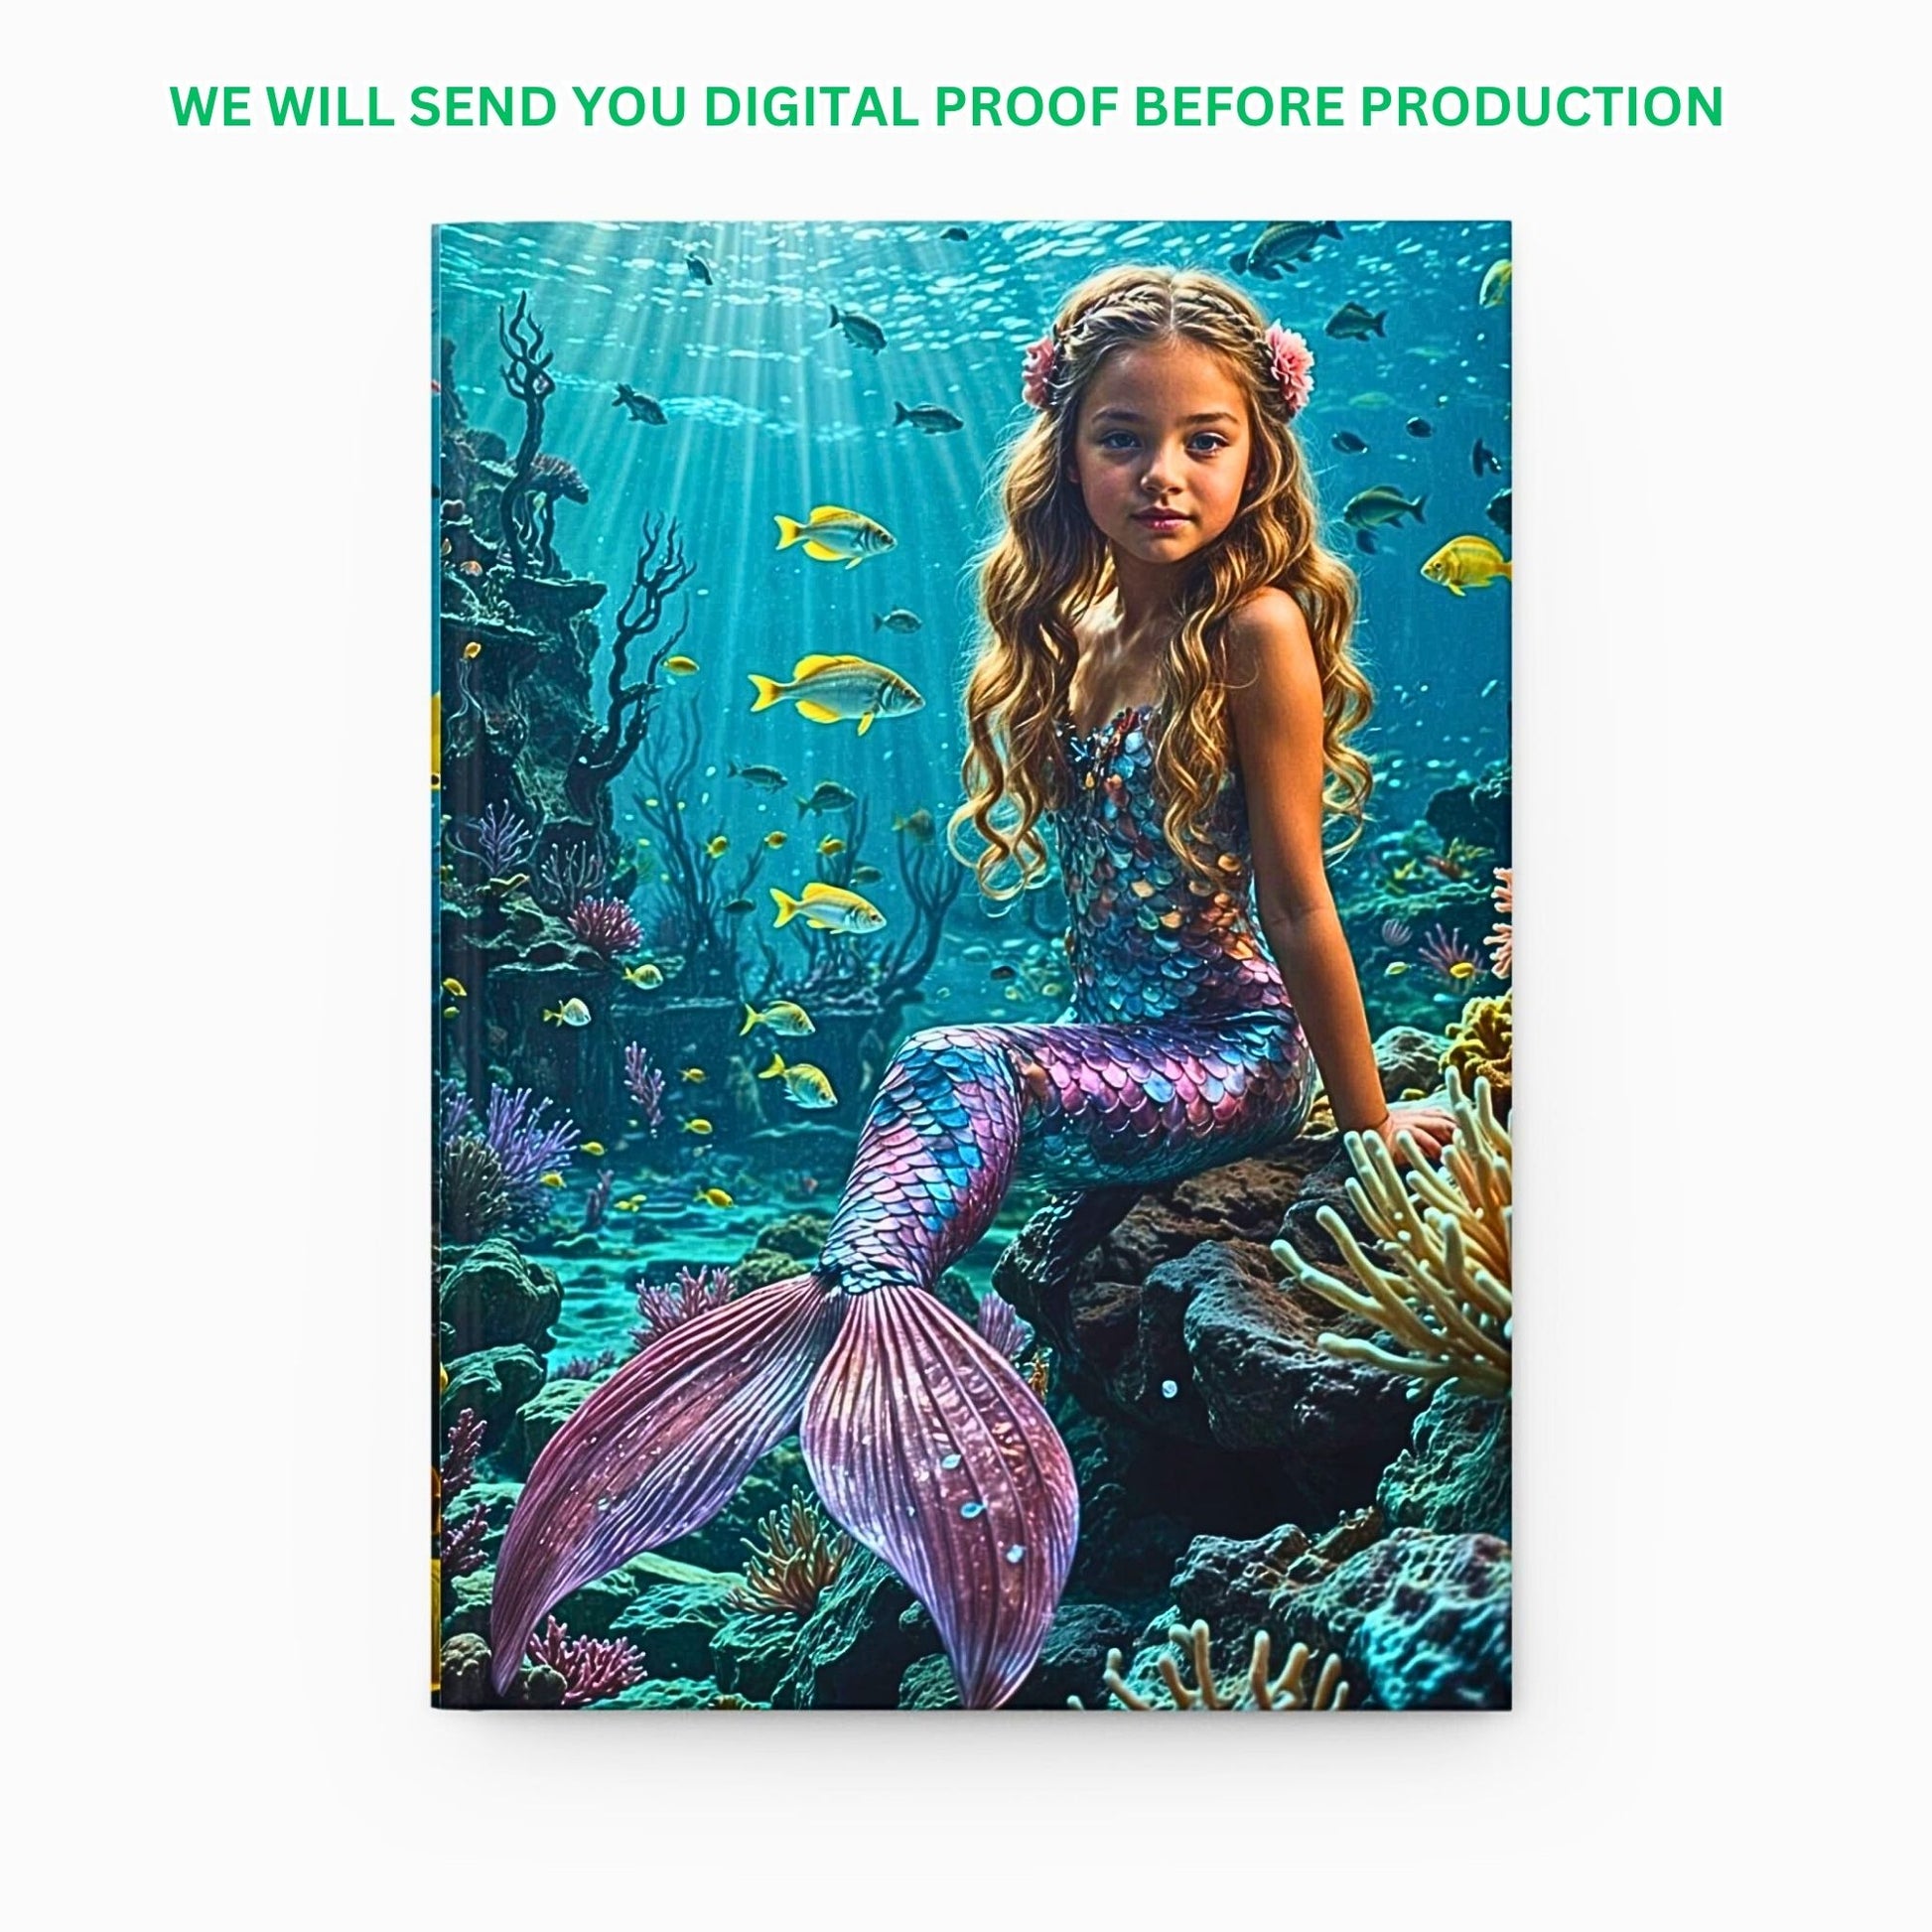 Explore the depths of imagination with our Custom Mermaid Journal, personalized from a cherished photo. Ideal for birthdays, this unique gift for girls blends creativity with practicality, perfect for documenting dreams and adventures.